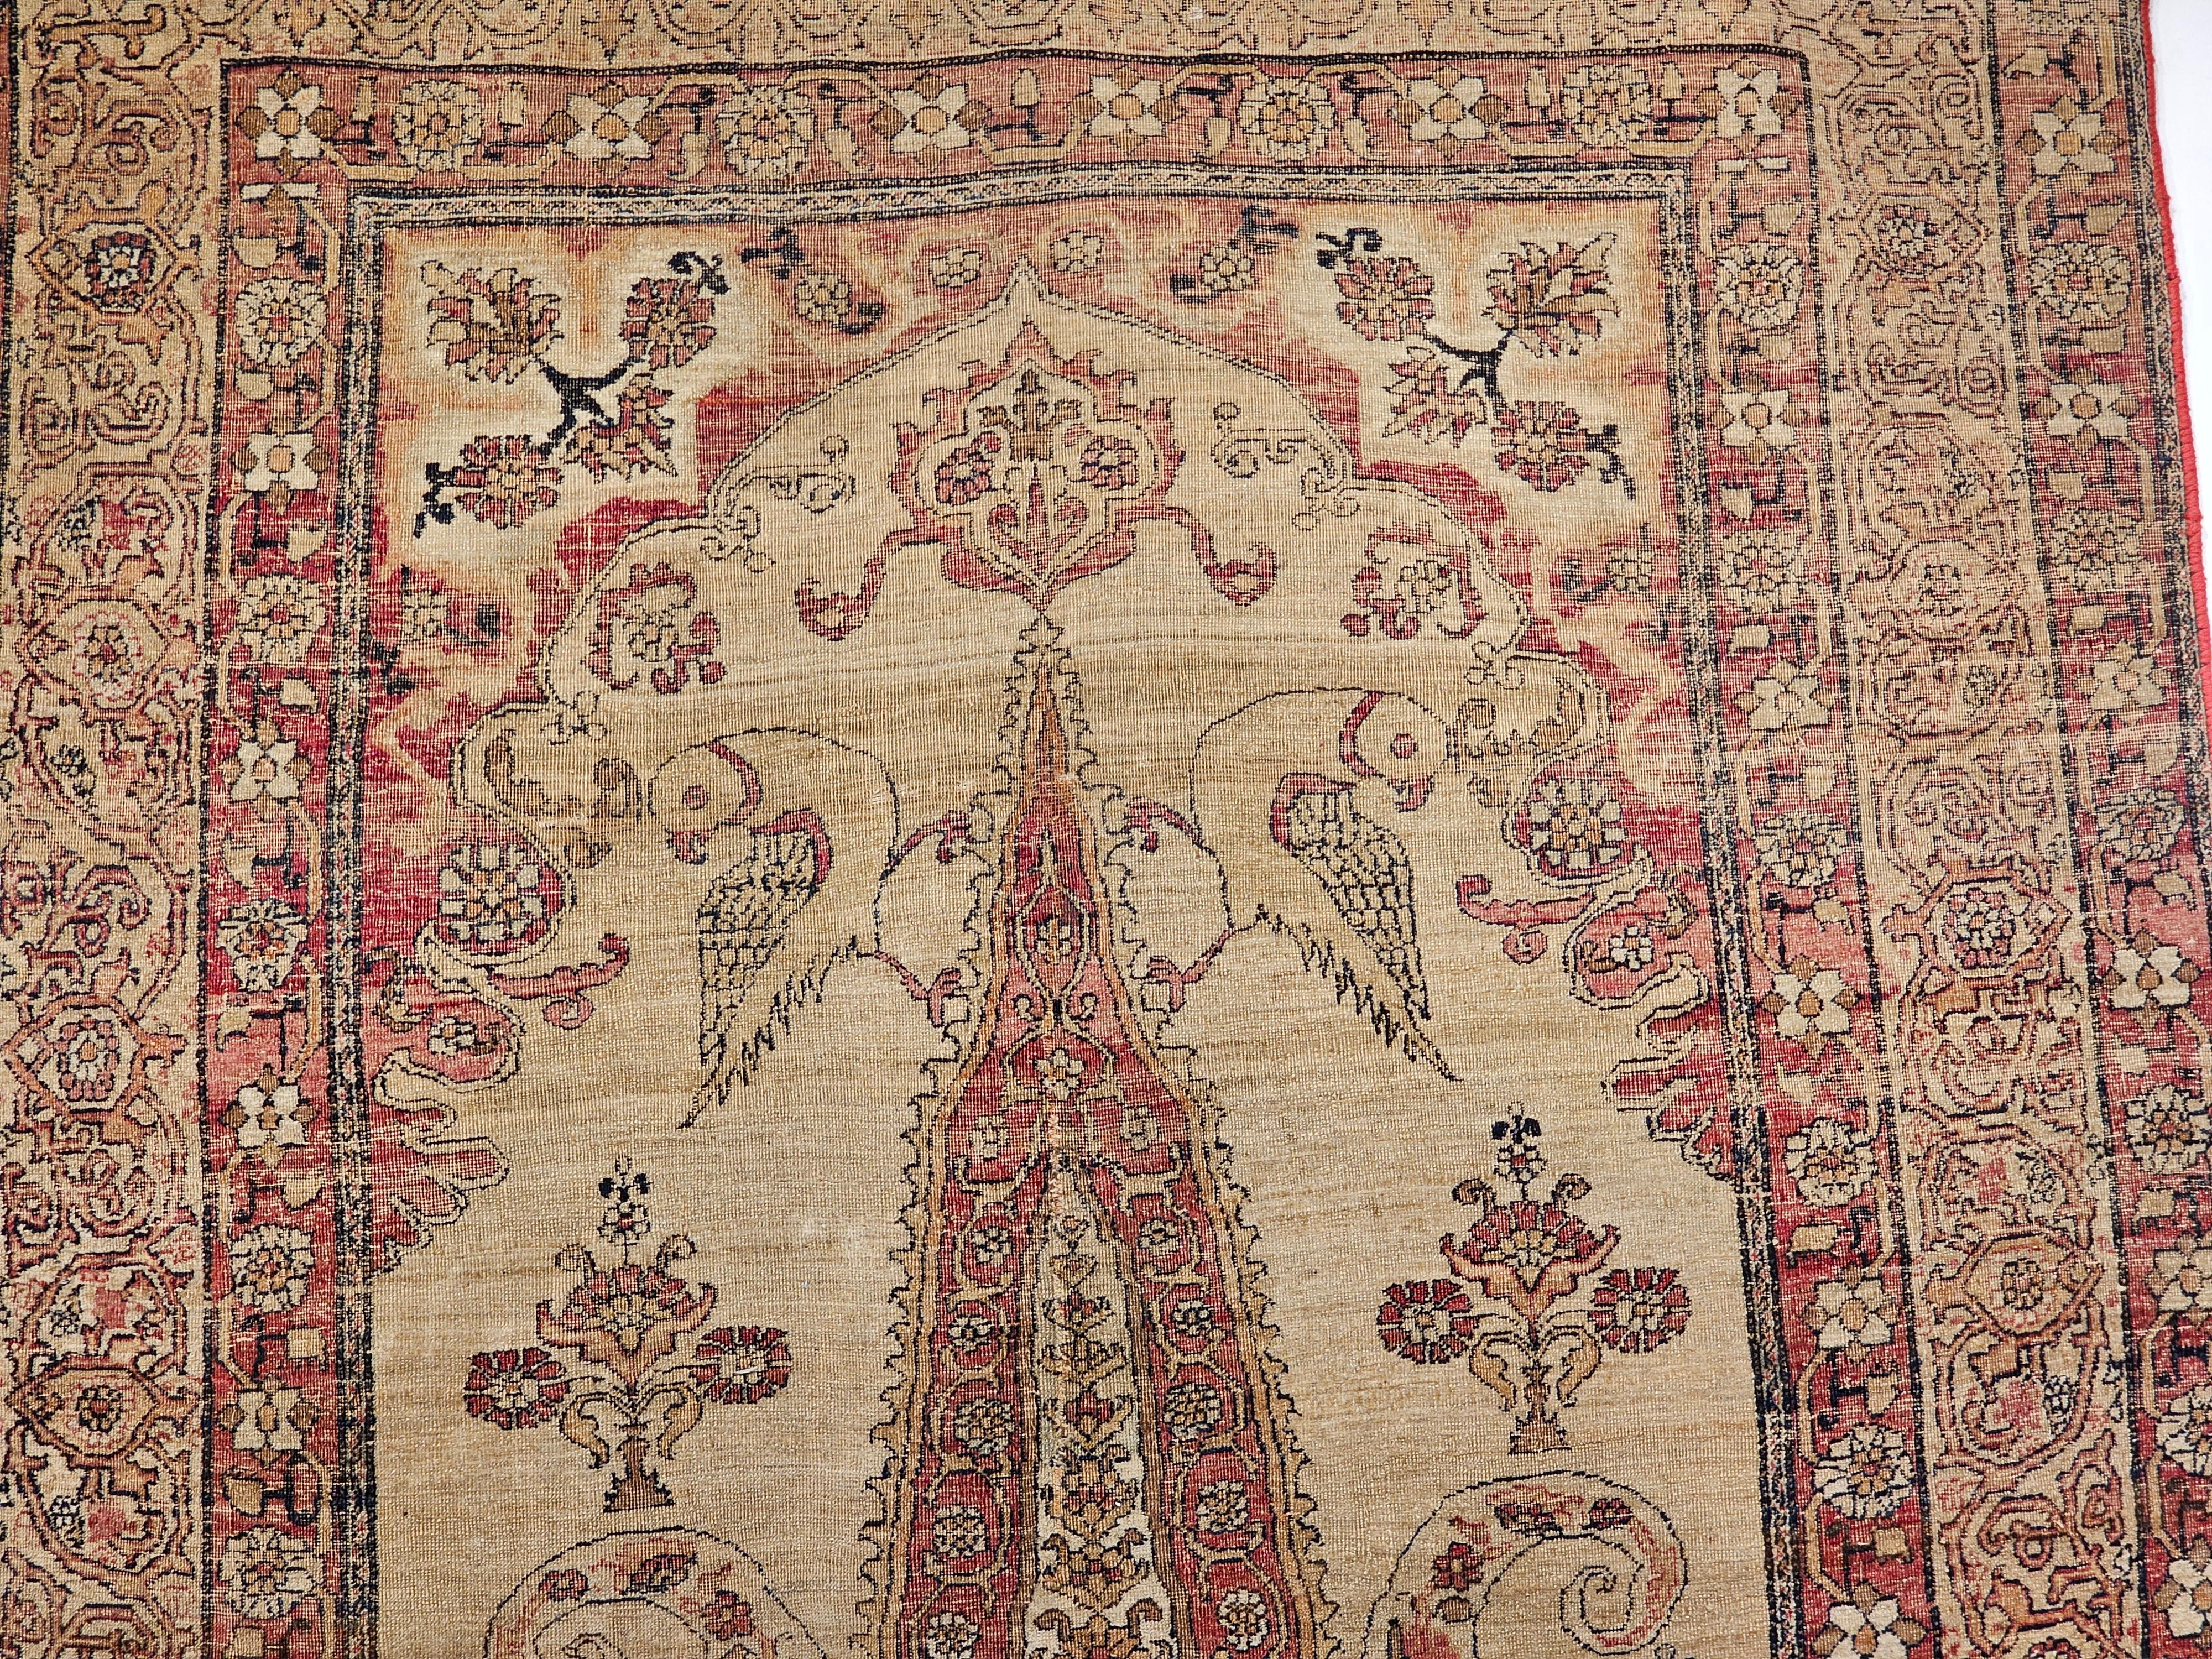 19th Century Persian Kerman Lavar Pictorial “Tree of Life” Rug in Camel, Red For Sale 1